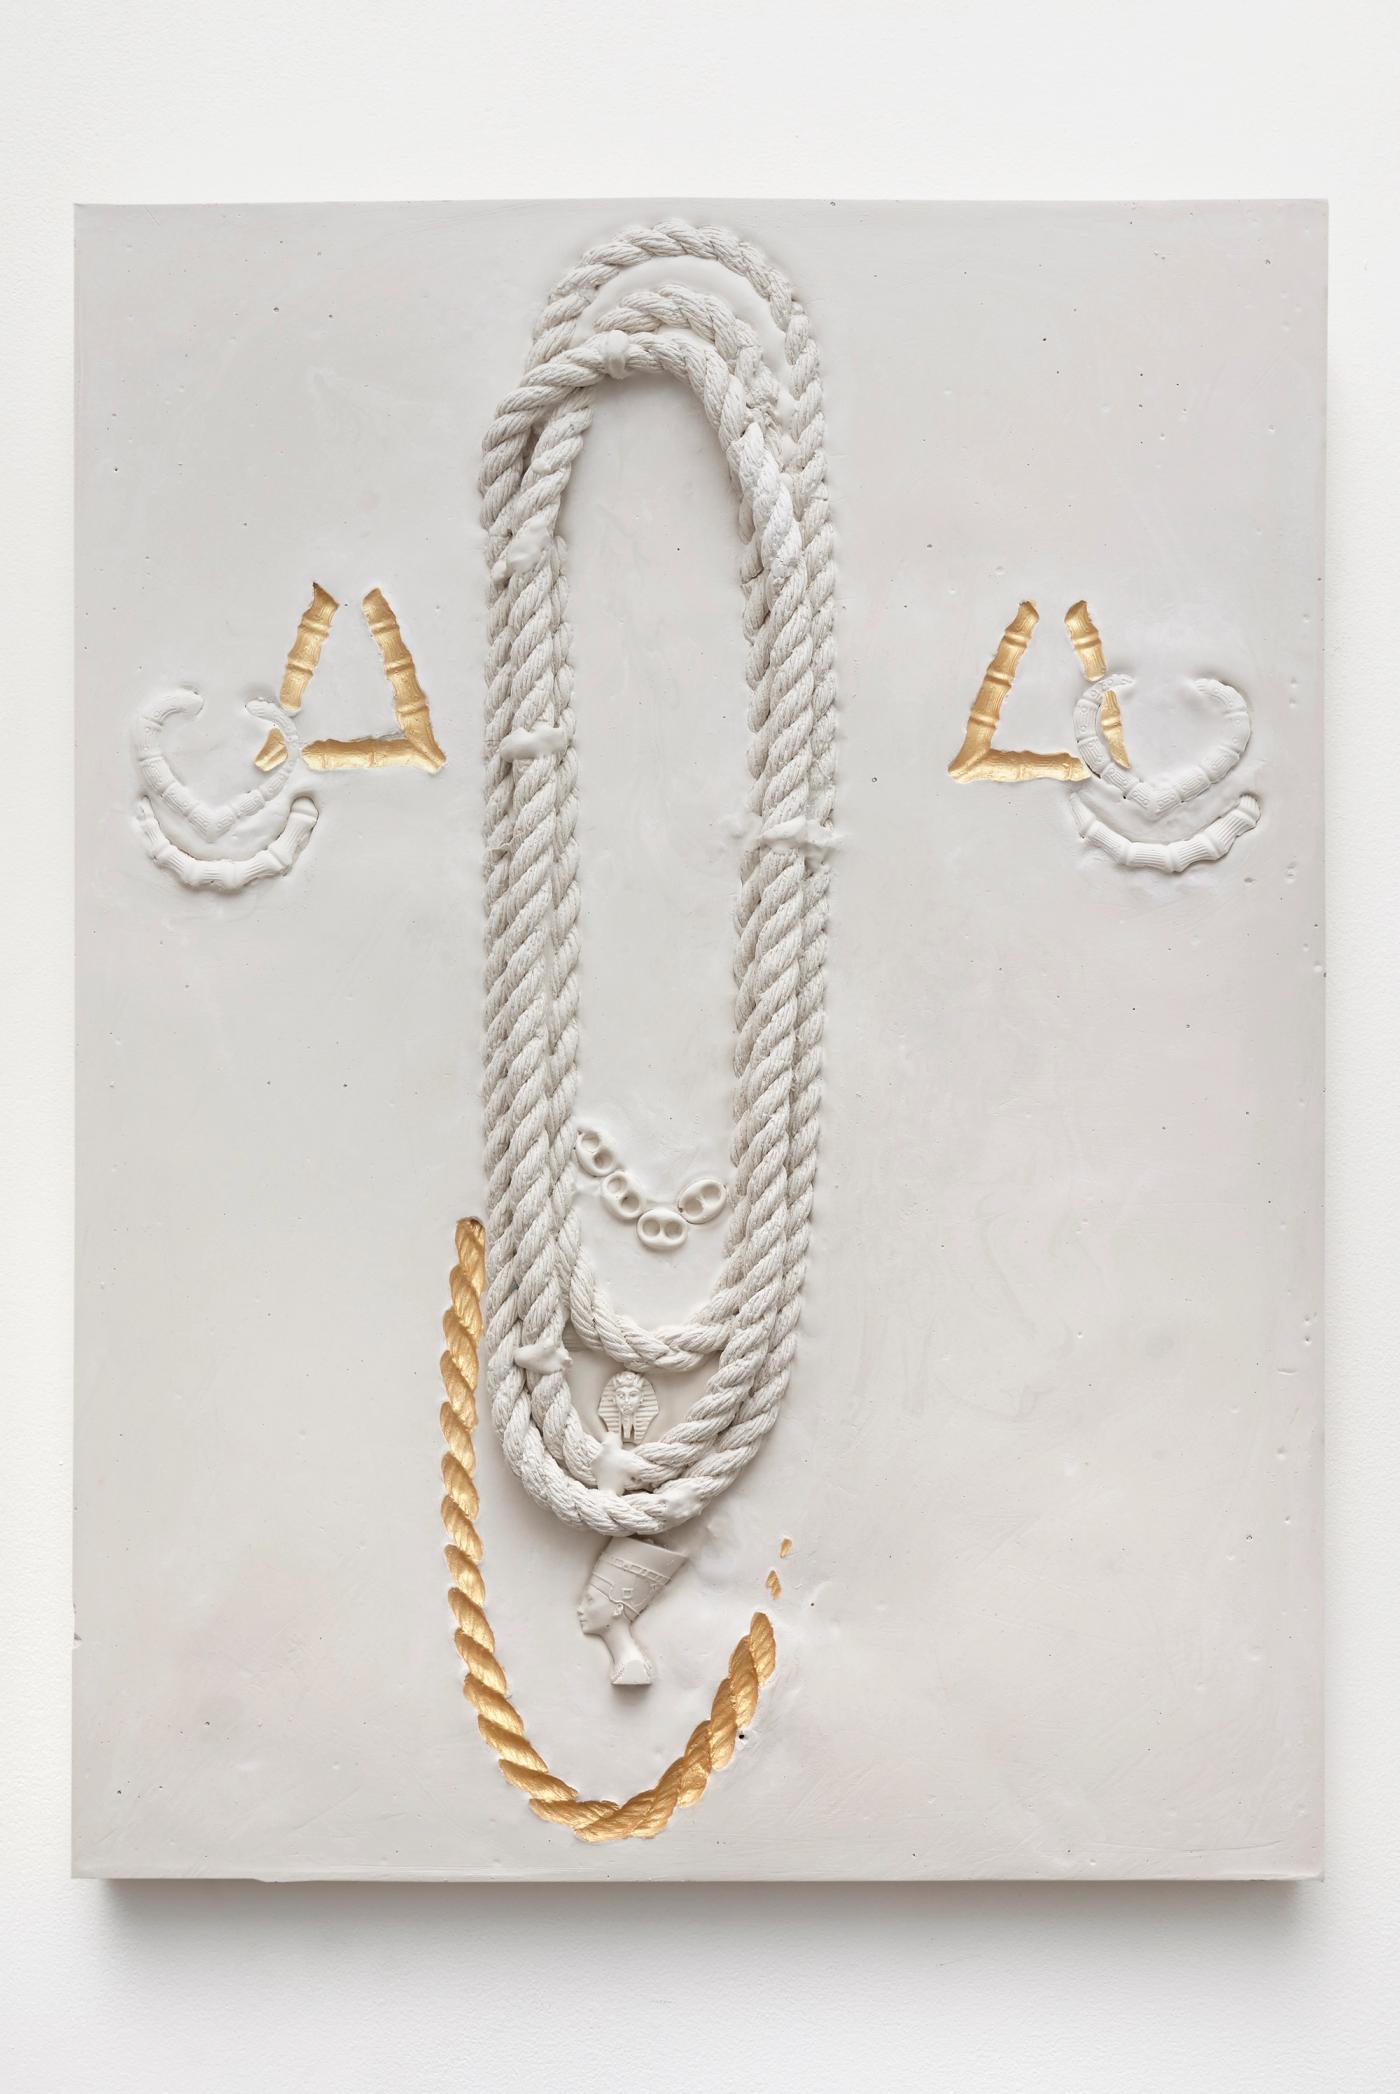 Image of Composition with Rope Chains, 2023: Plaster and acrylic